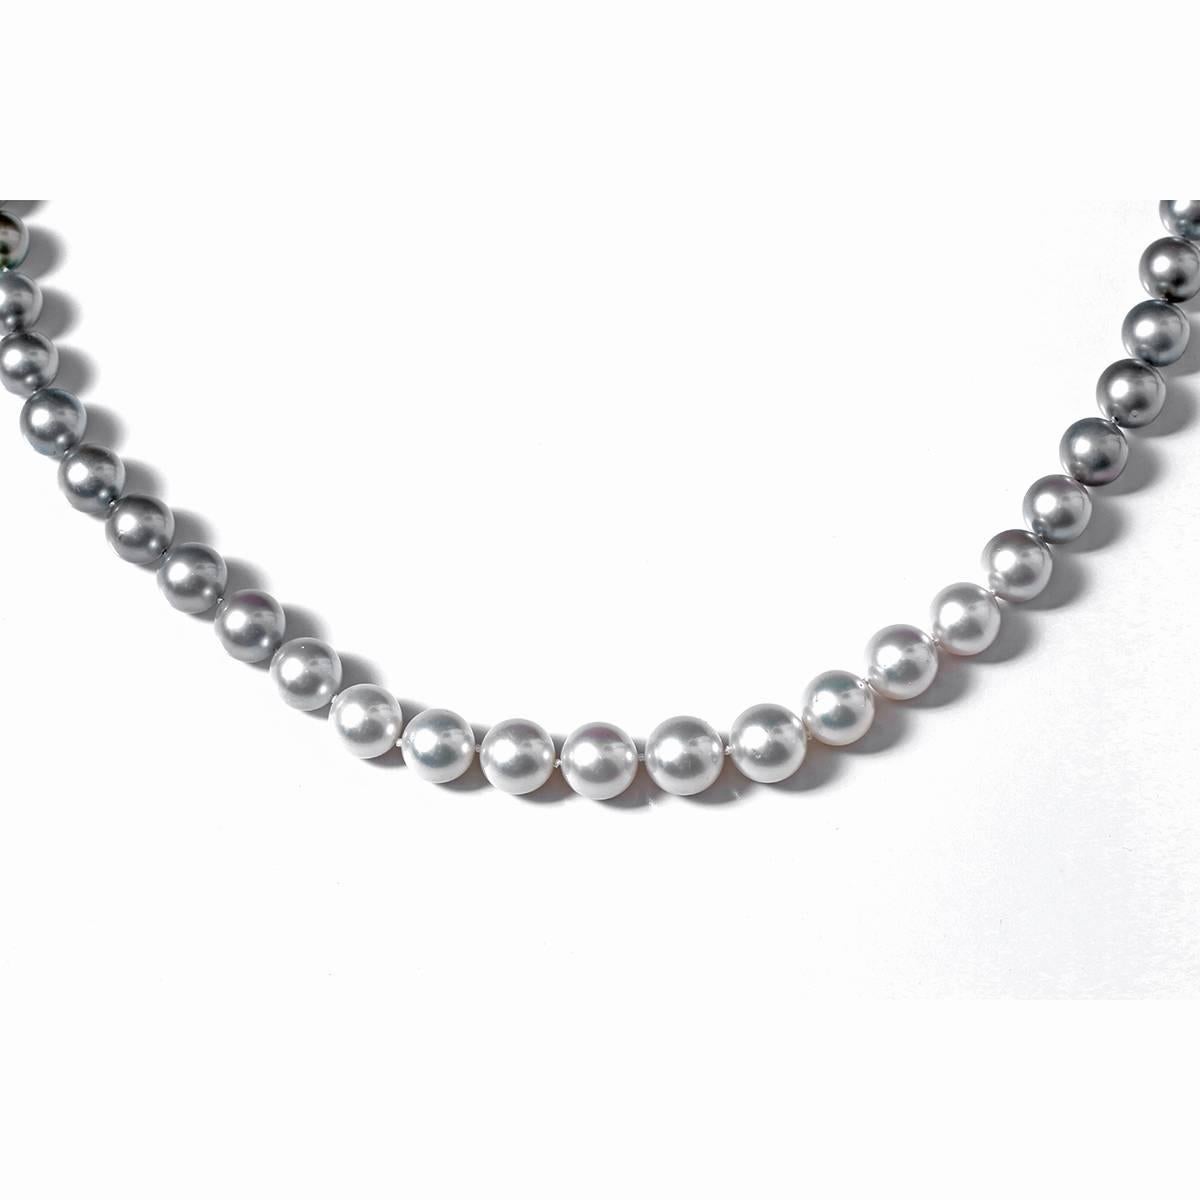 This stunning necklace features 63 piece, 11-15mm, South Sea pearls with a 14k white gold and diamond clasp. Necklace is apx. 34-inches in length.  Total weight is 190.6 grams.